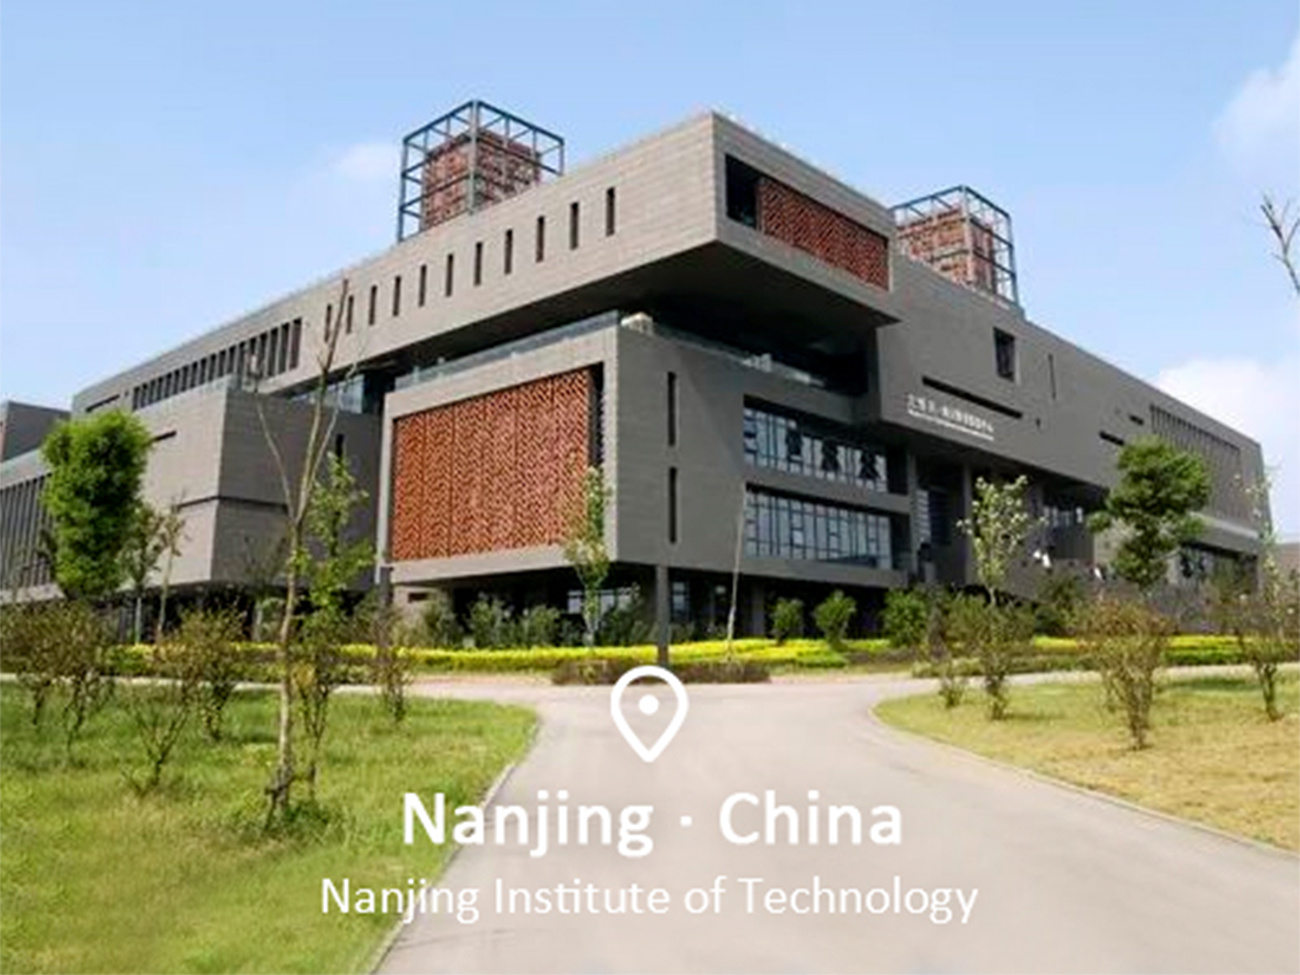 Nanjing Institute of Technology Outlooking